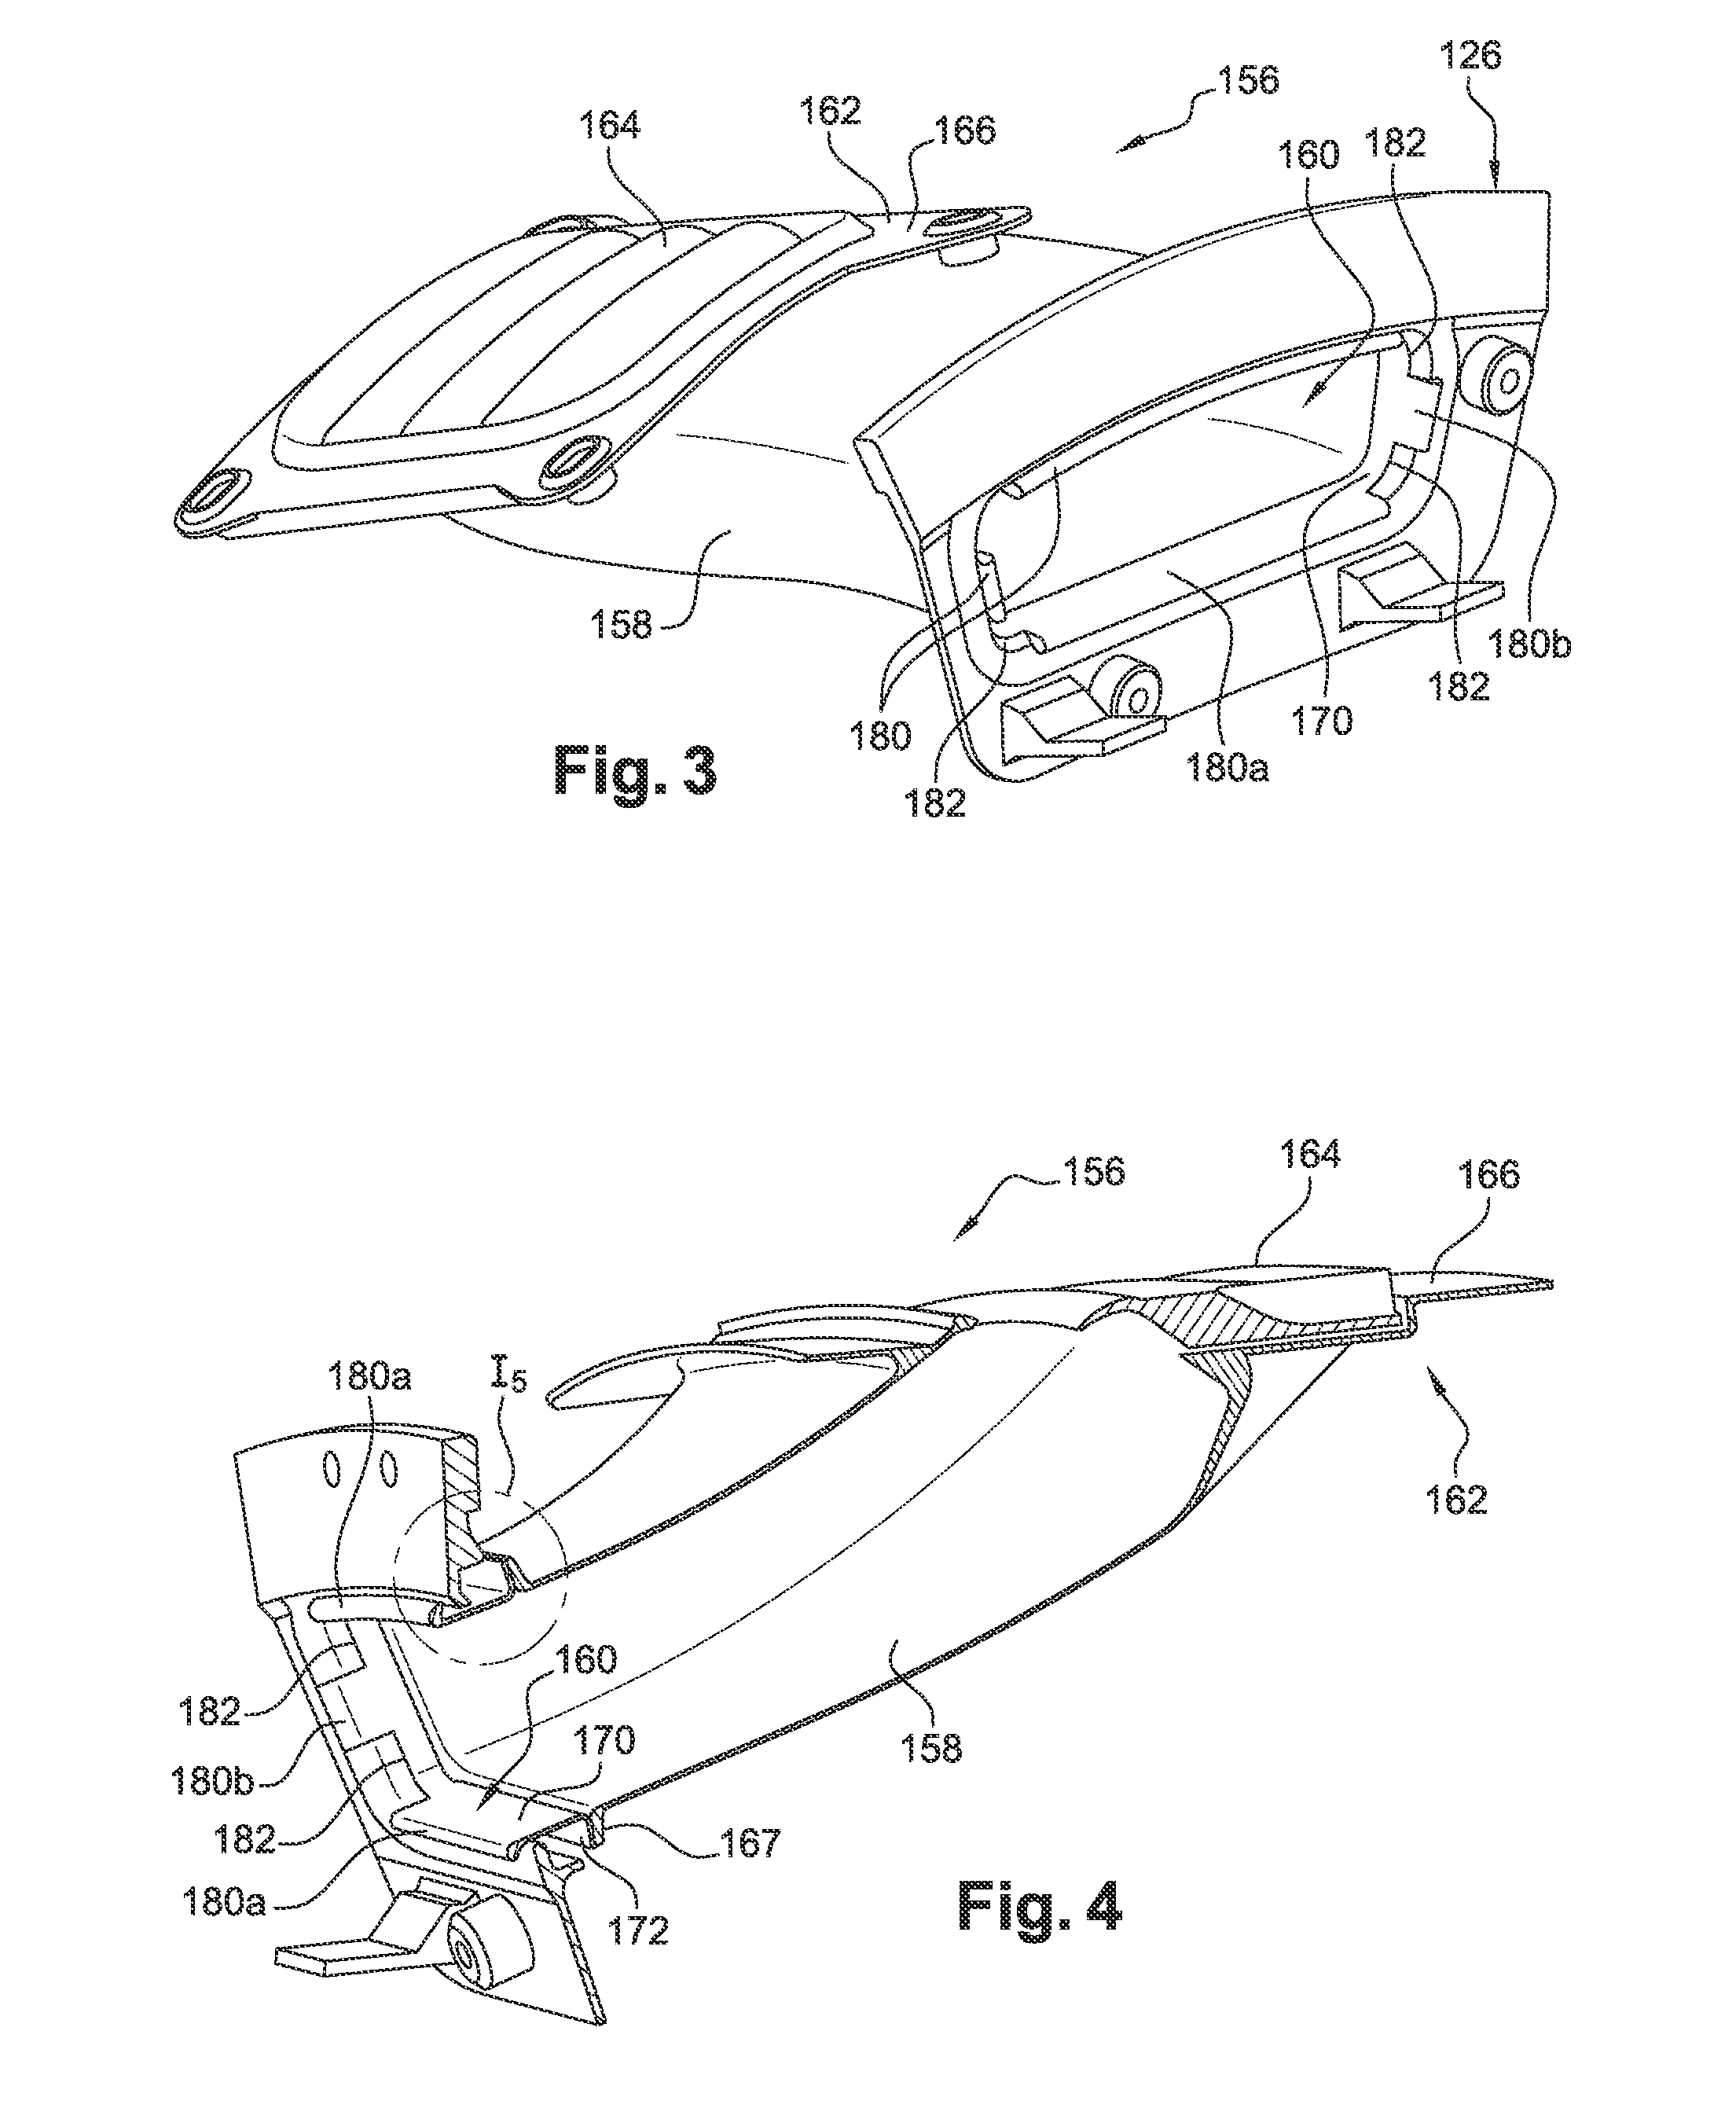 Attachment of a discharge conduit of a turbine engine